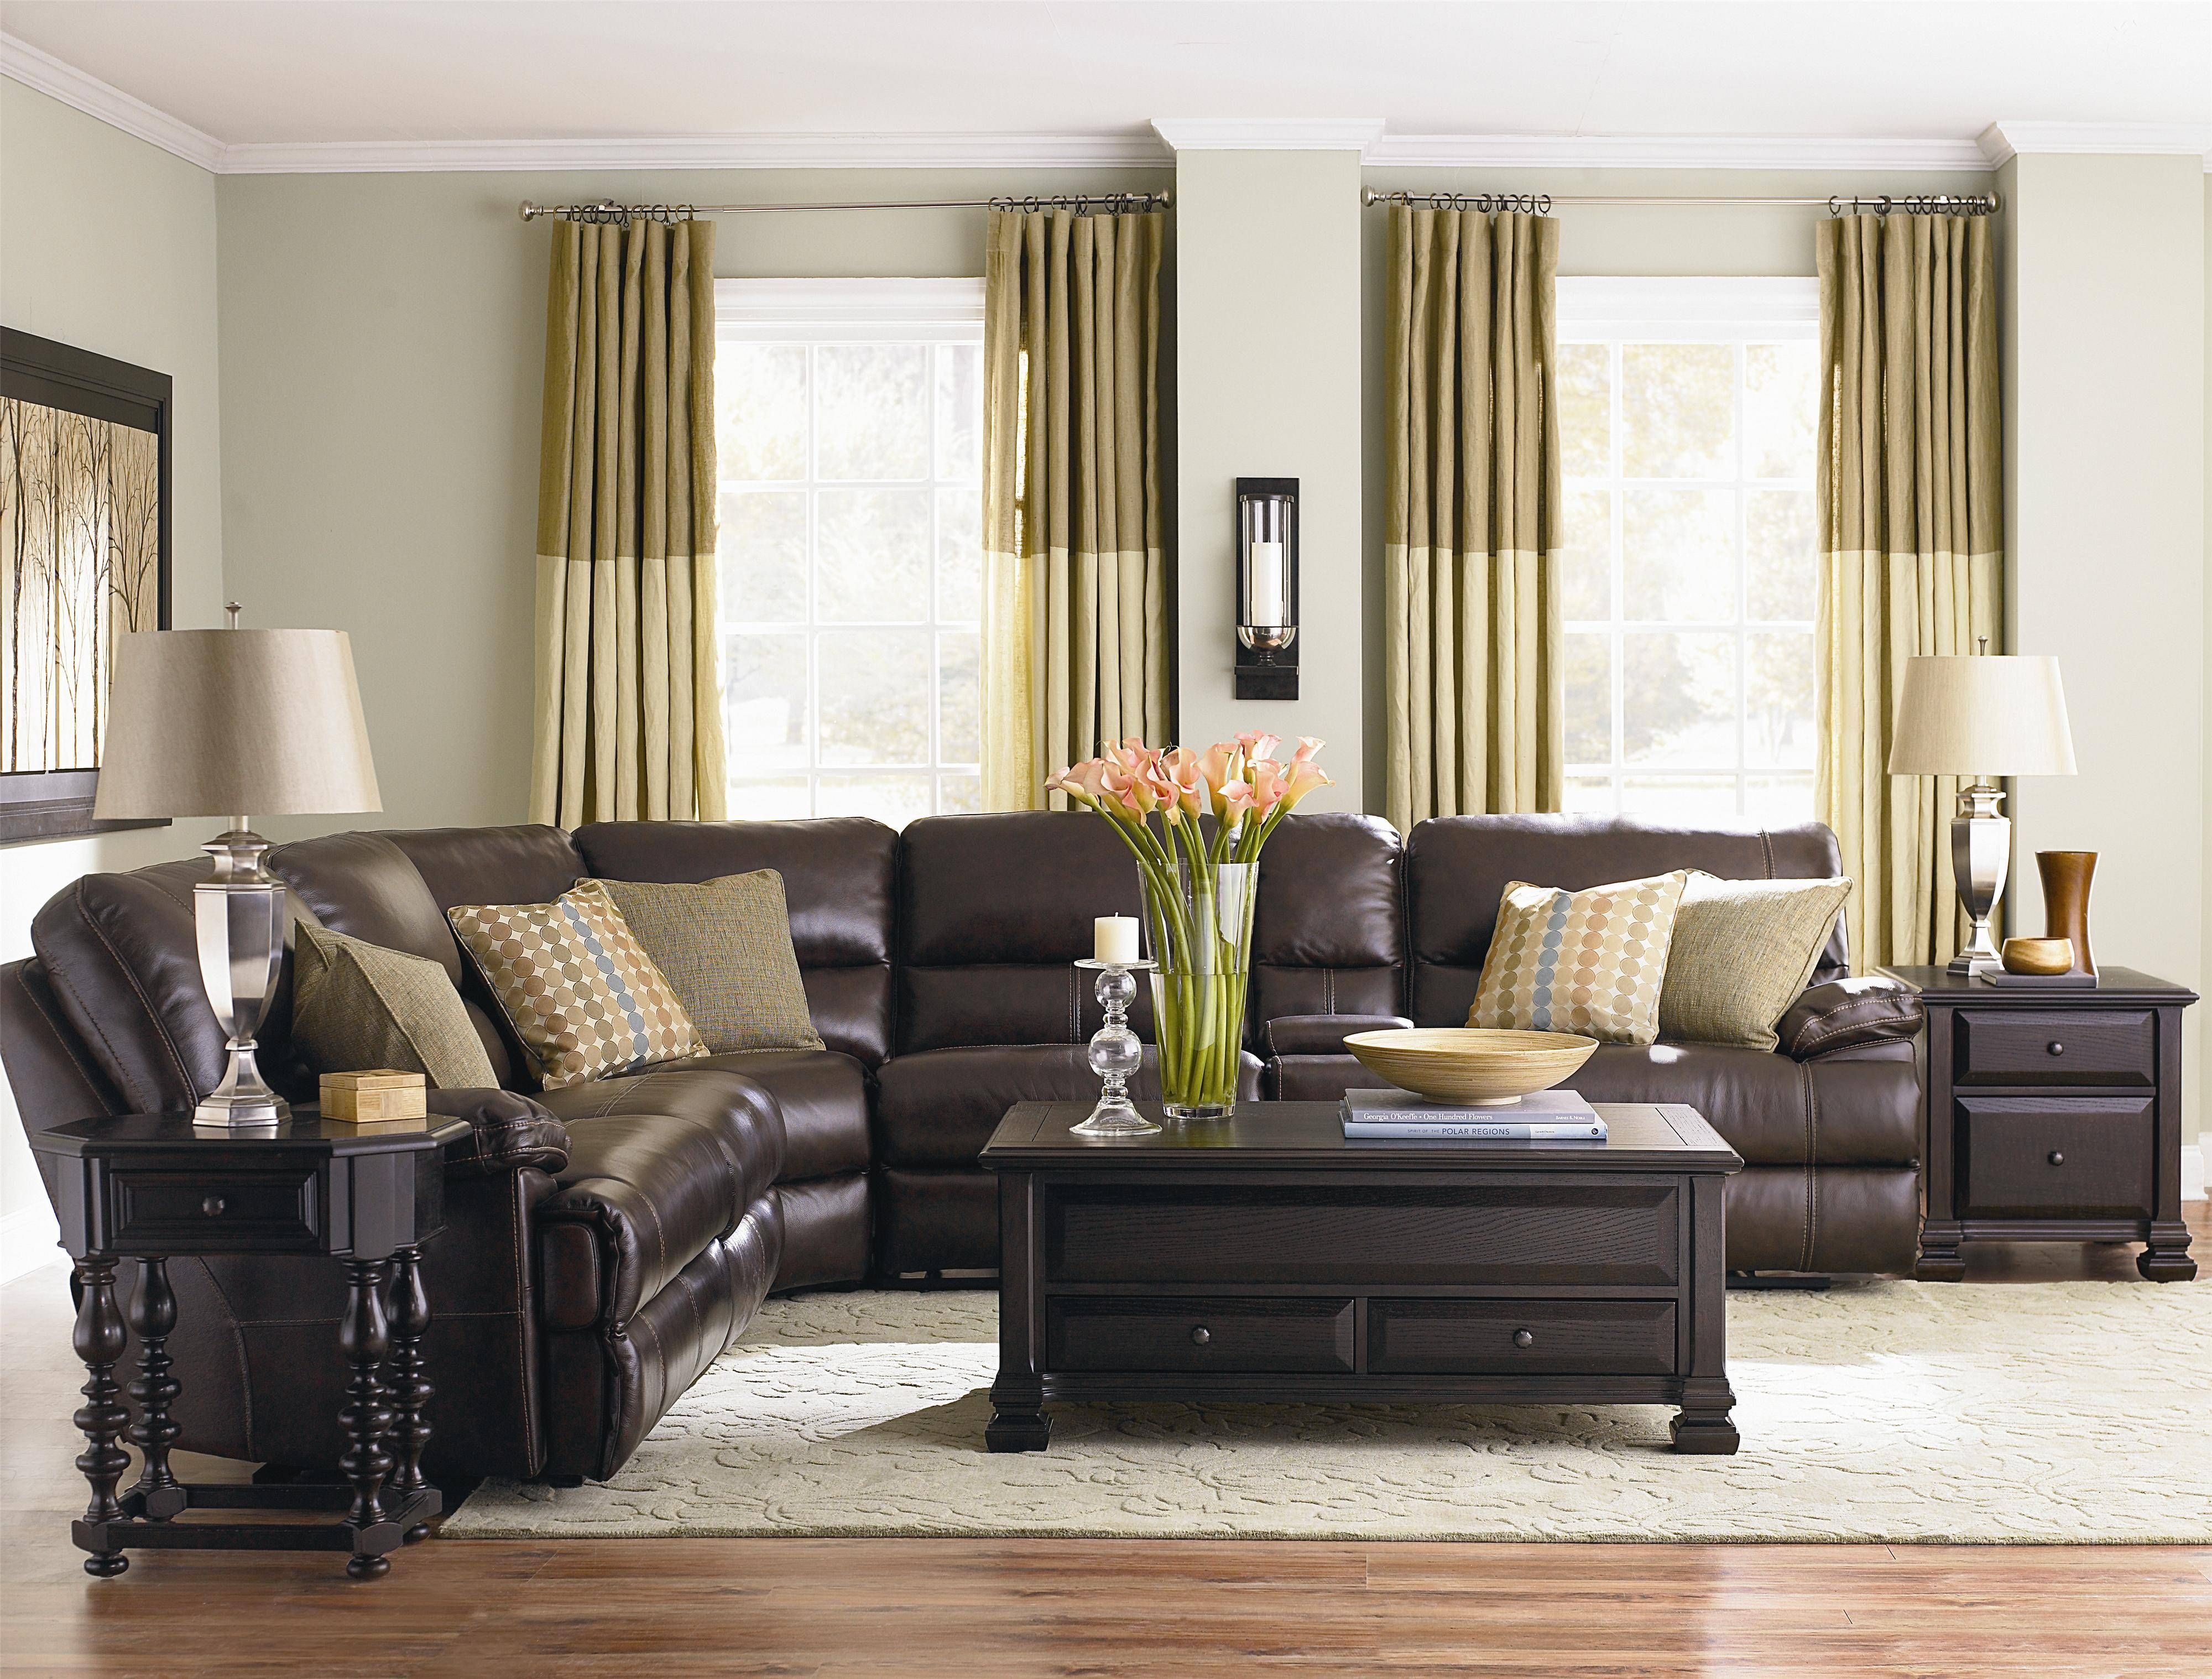 Bassett Dillon 6 Piece Motion Sectional With Padded Armrests Pertaining To 6 Piece Leather Sectional Sofa (View 13 of 30)